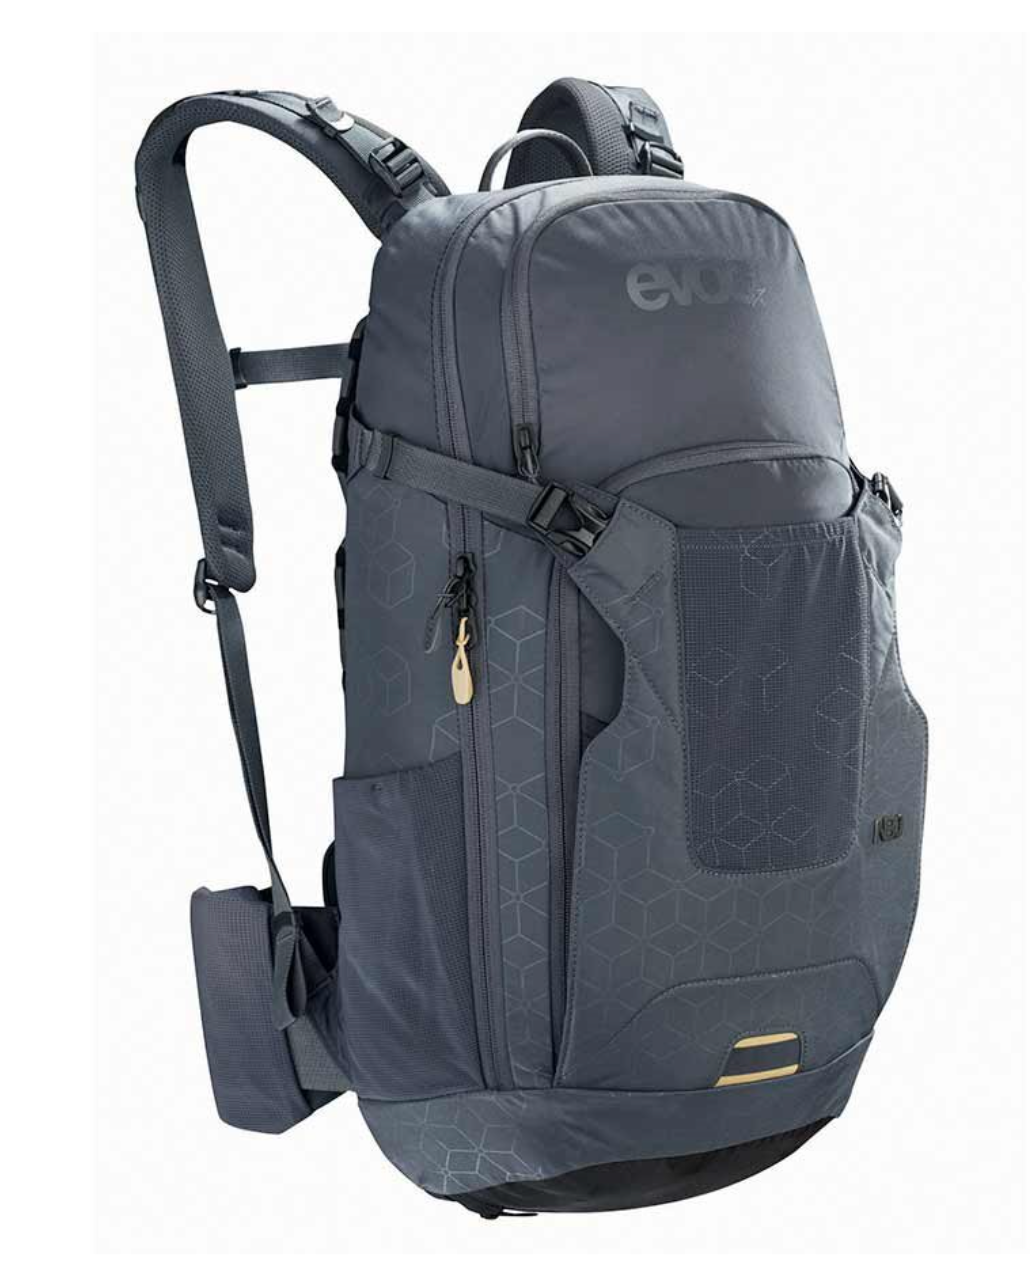 EVOC - NEO, PROTECTOR BACKPACK, 16L, CARBON GREY, XL